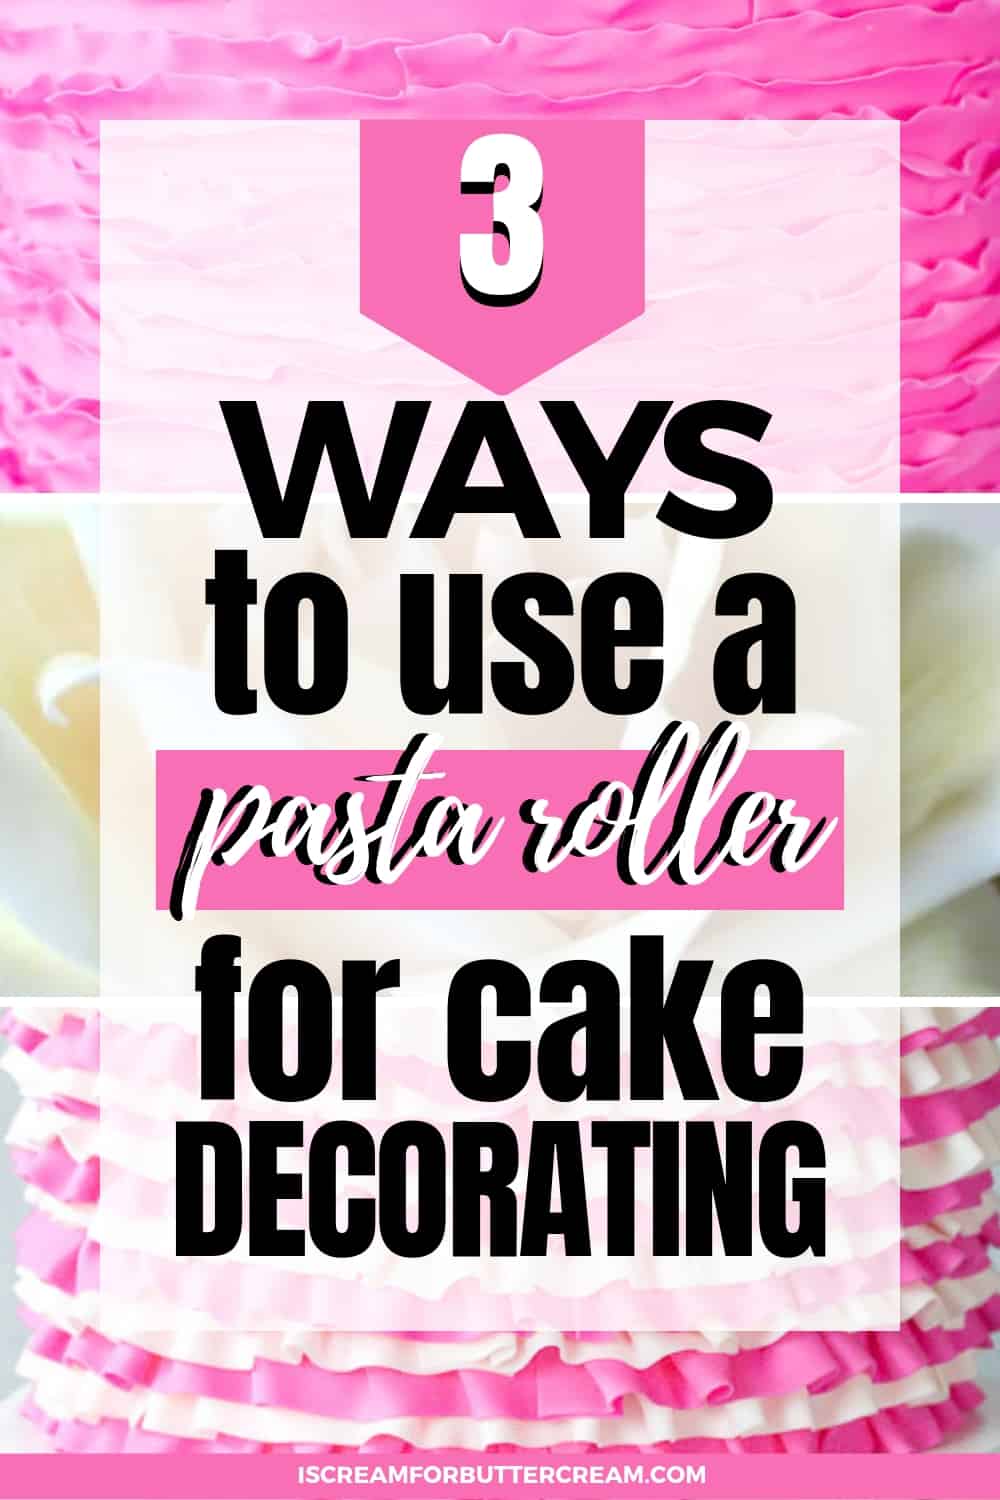 3 Ways to use a pasta roller for cake decorating New Pin graphic 1